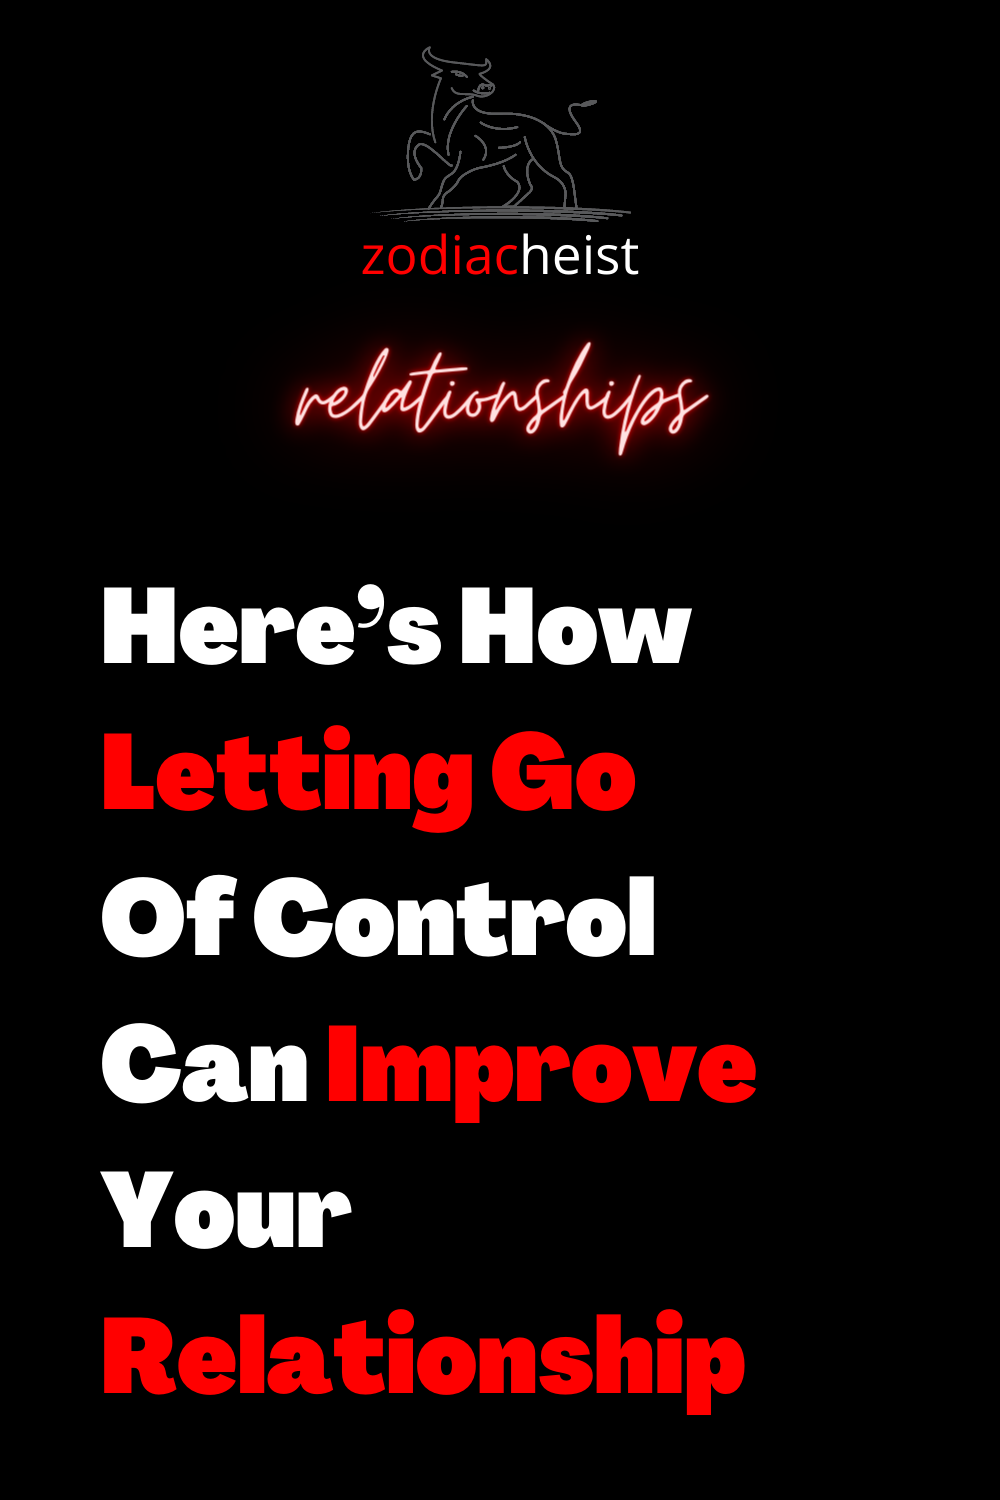 Here’s How Letting Go Of Control Can Improve Your Relationship